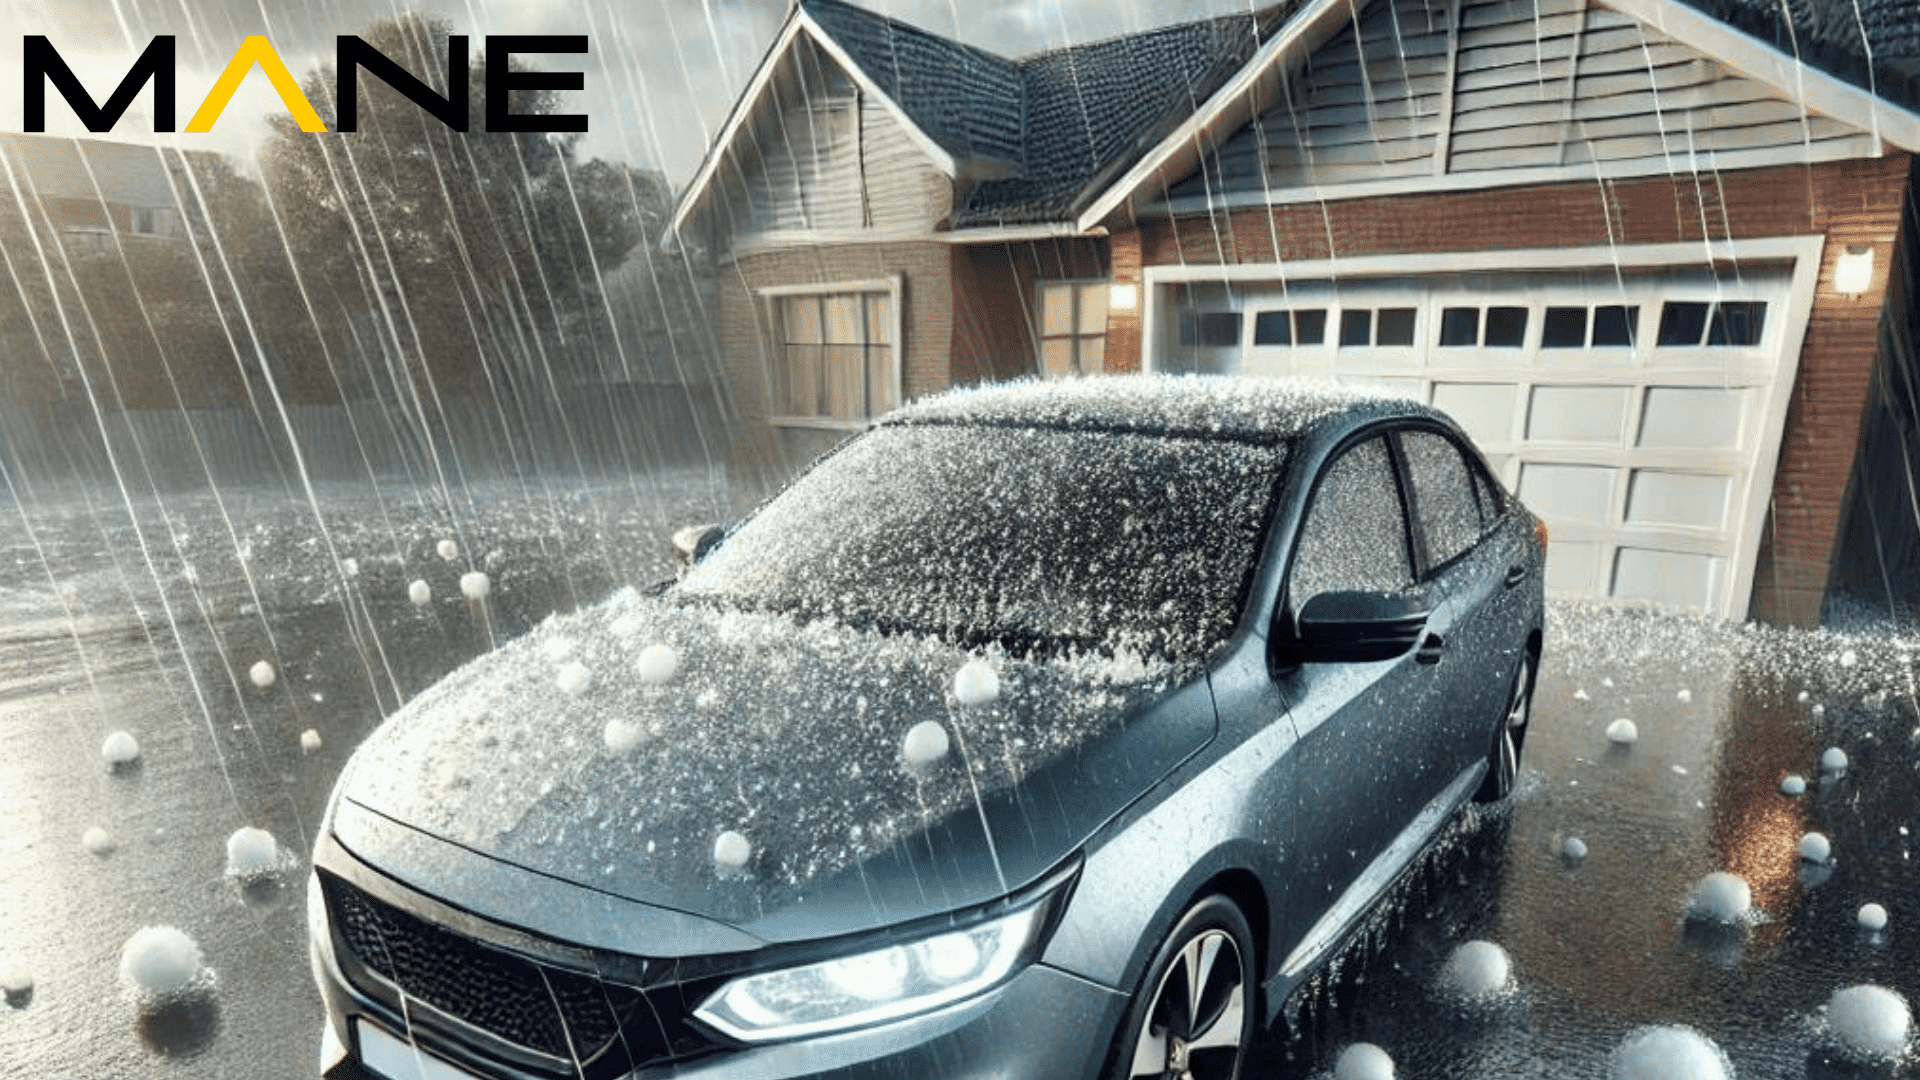 Hail Damage Leads To Surge In Demand For Automotive Repair 